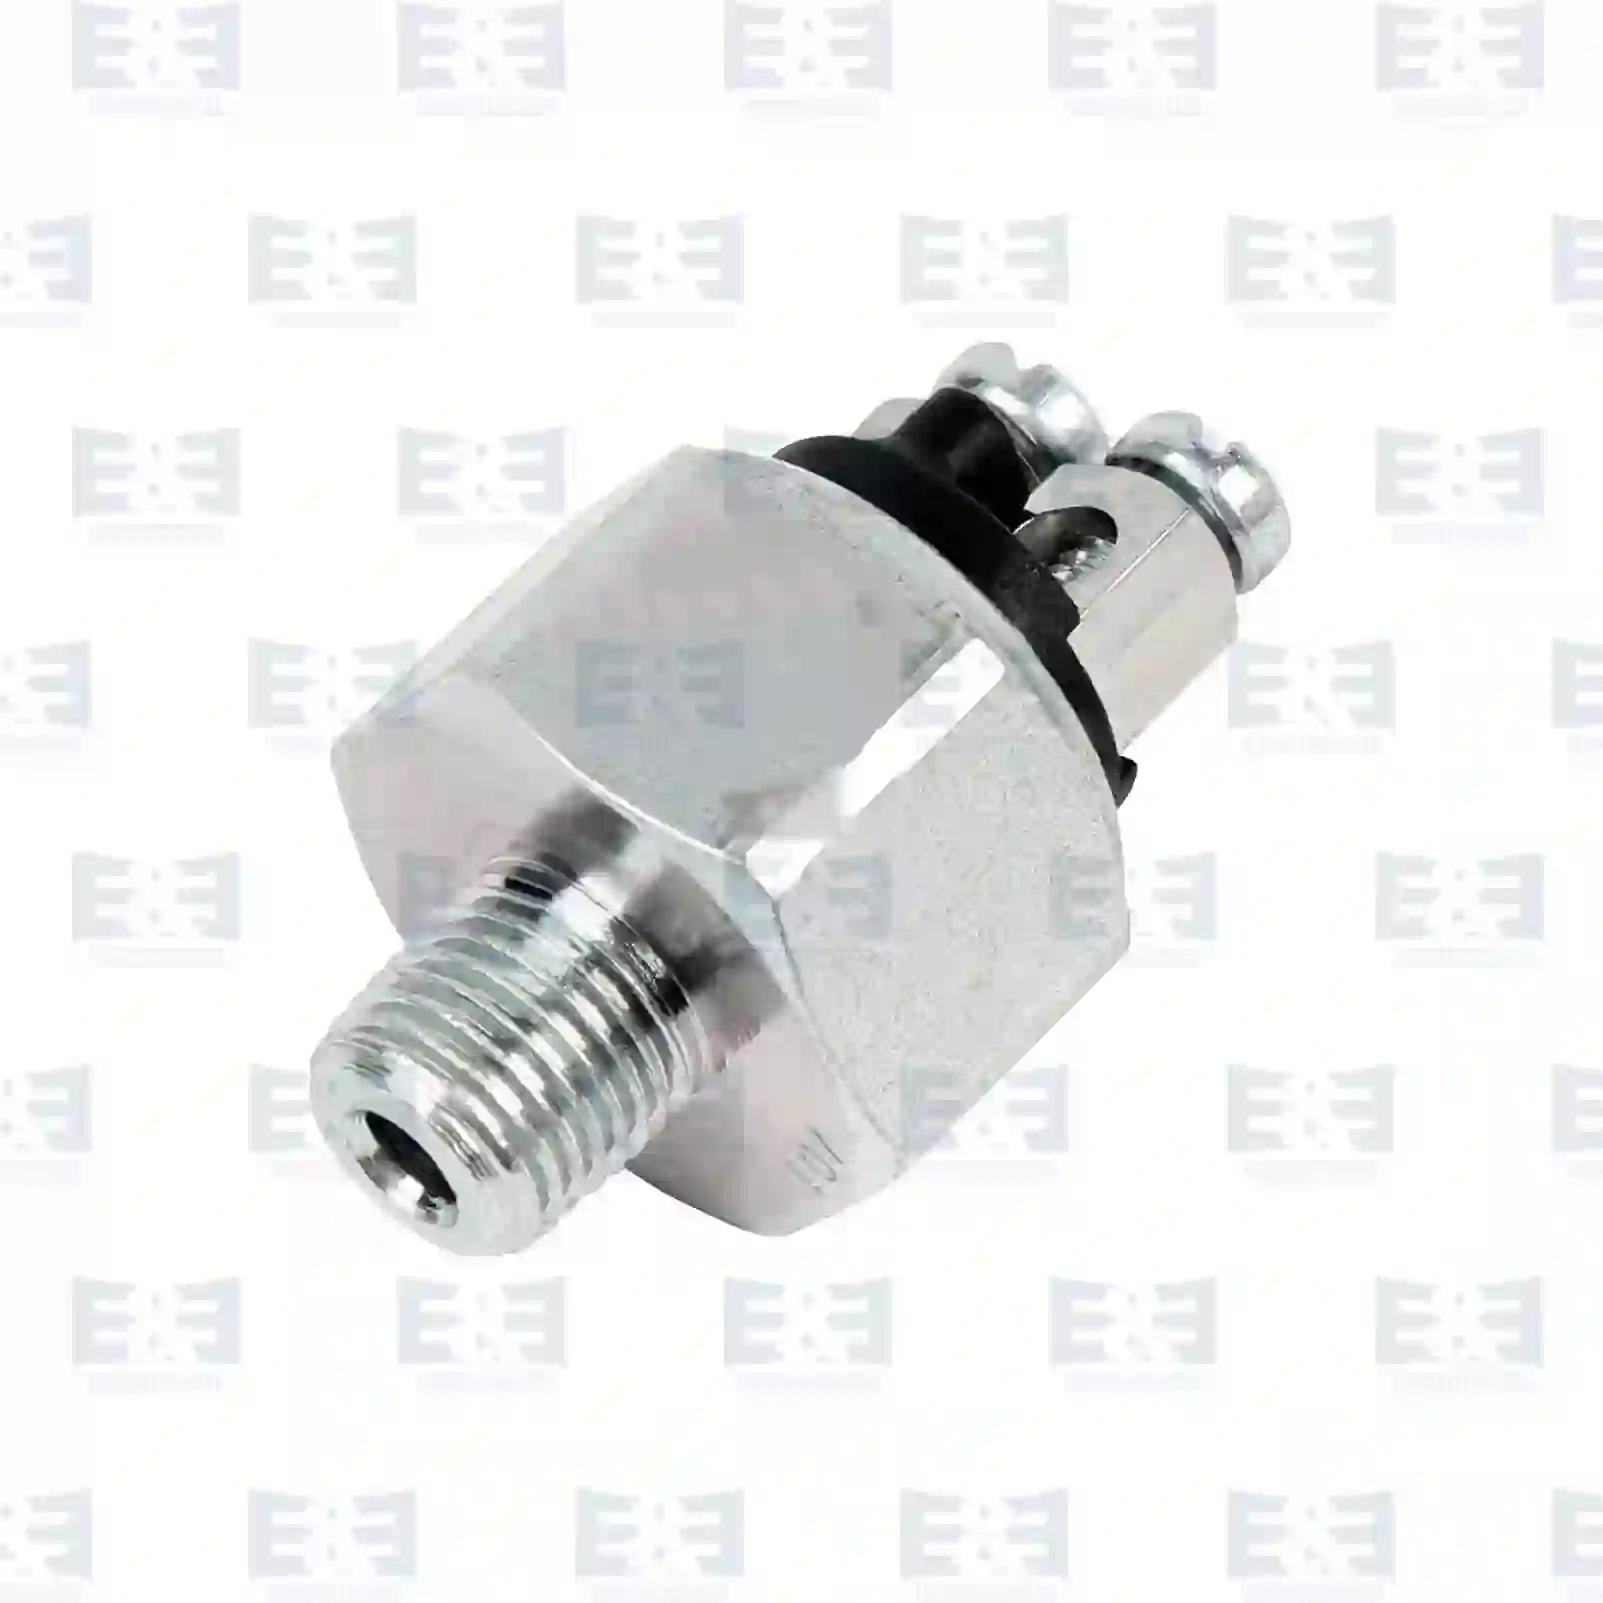 Other Switch Switch, EE No 2E2290929 ,  oem no:0005450109, 0005452209, 0005454609, 0005456109, 0015450809, 113945515H, 5000988565, 193595294, 111945515, 113945515H, 193595294 E&E Truck Spare Parts | Truck Spare Parts, Auotomotive Spare Parts